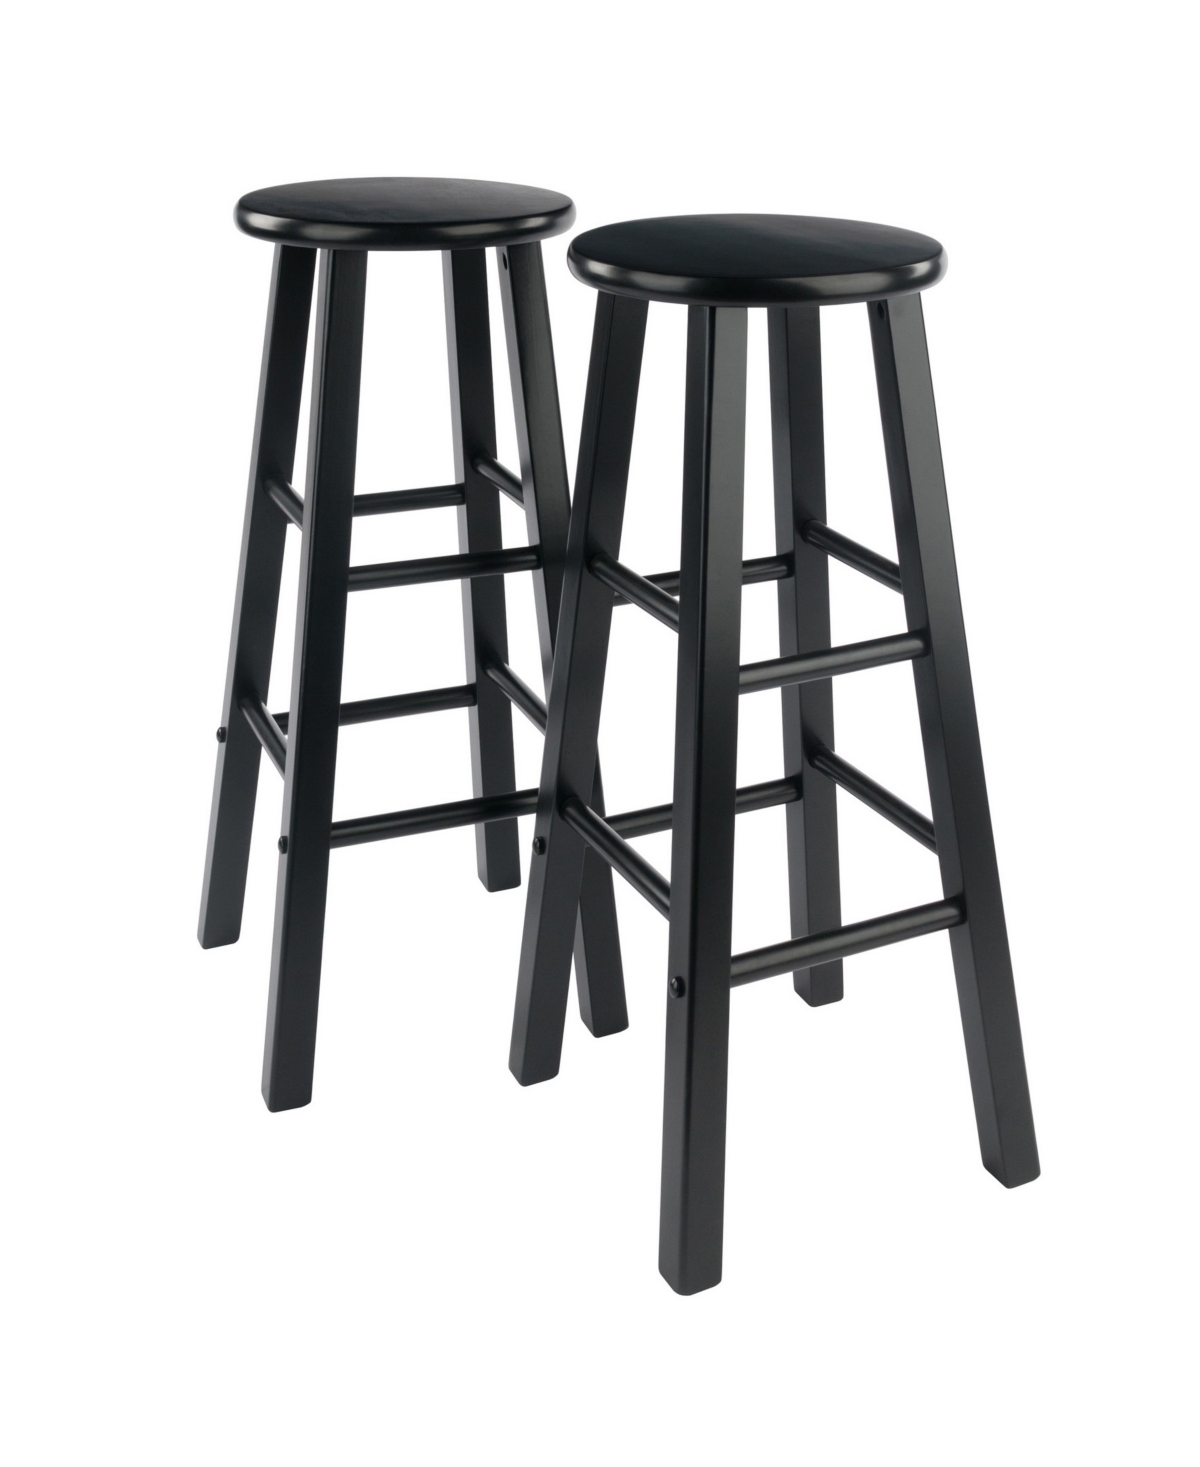 Winsome Element 2-piece Wood Bar Stool Set In Black